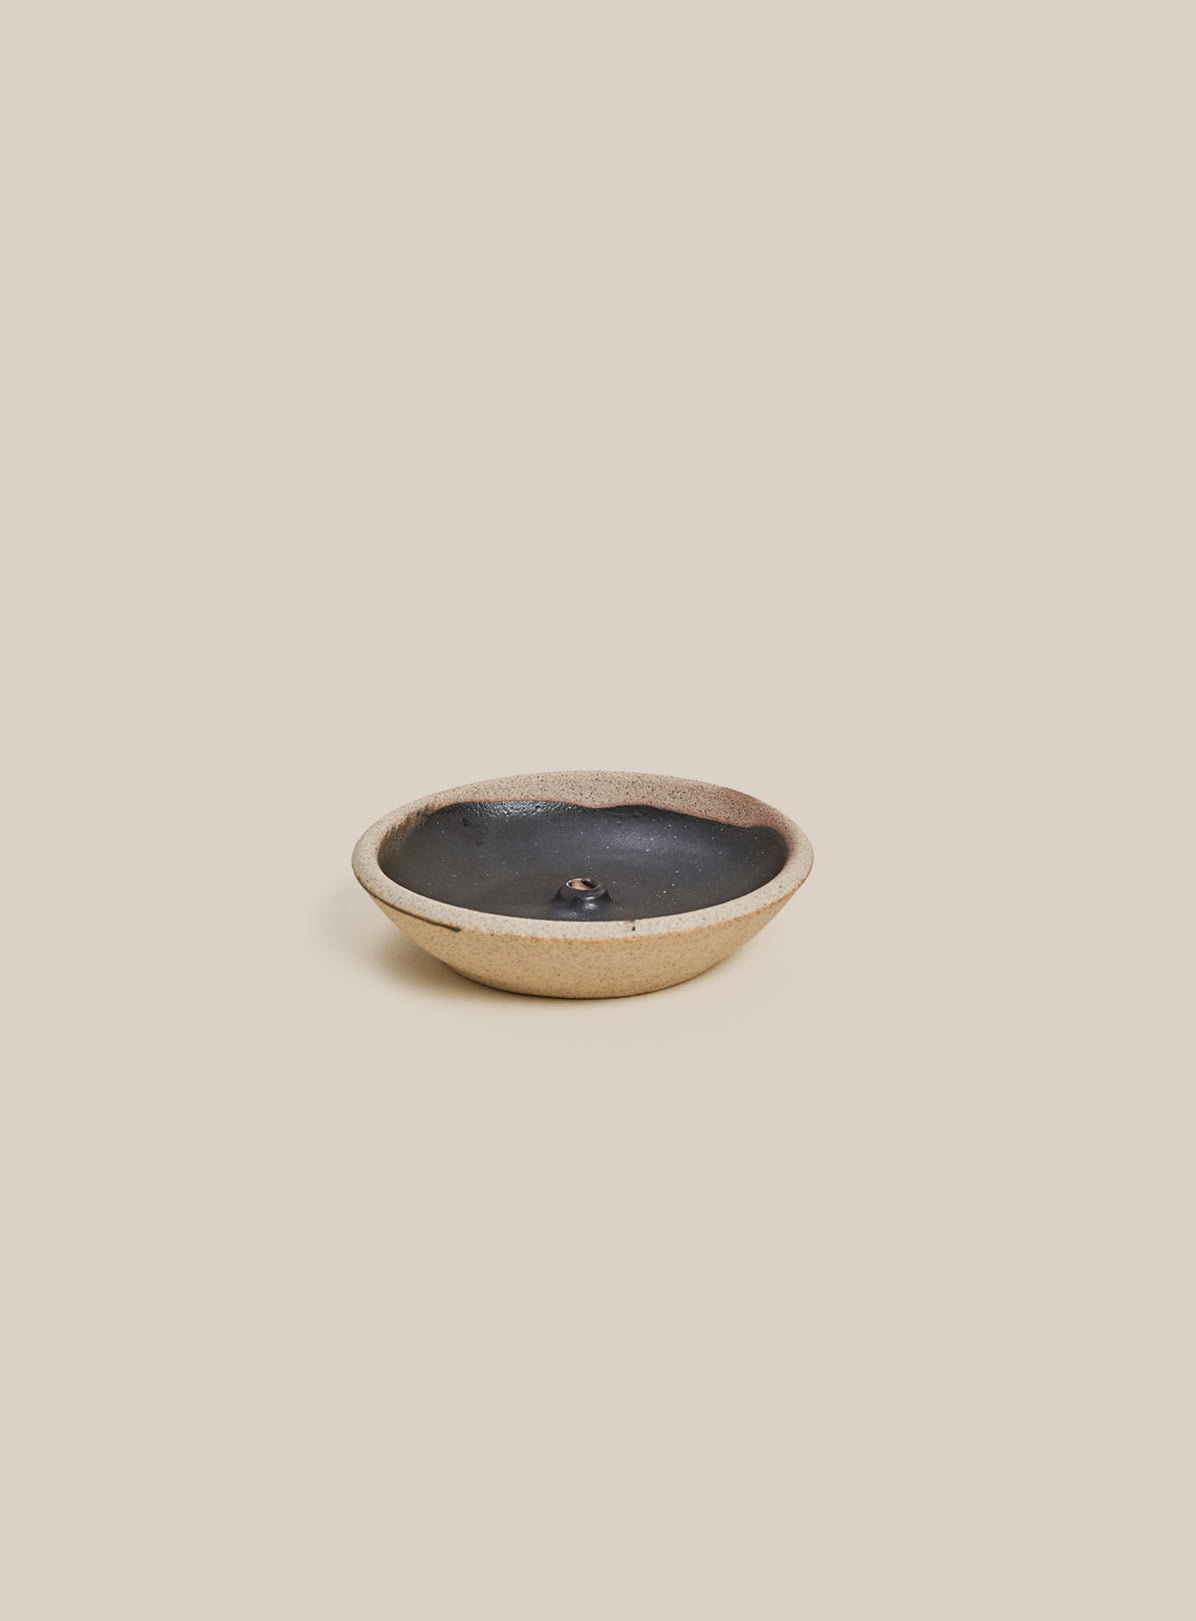 Black Woodfired Incense Holder By Incausa